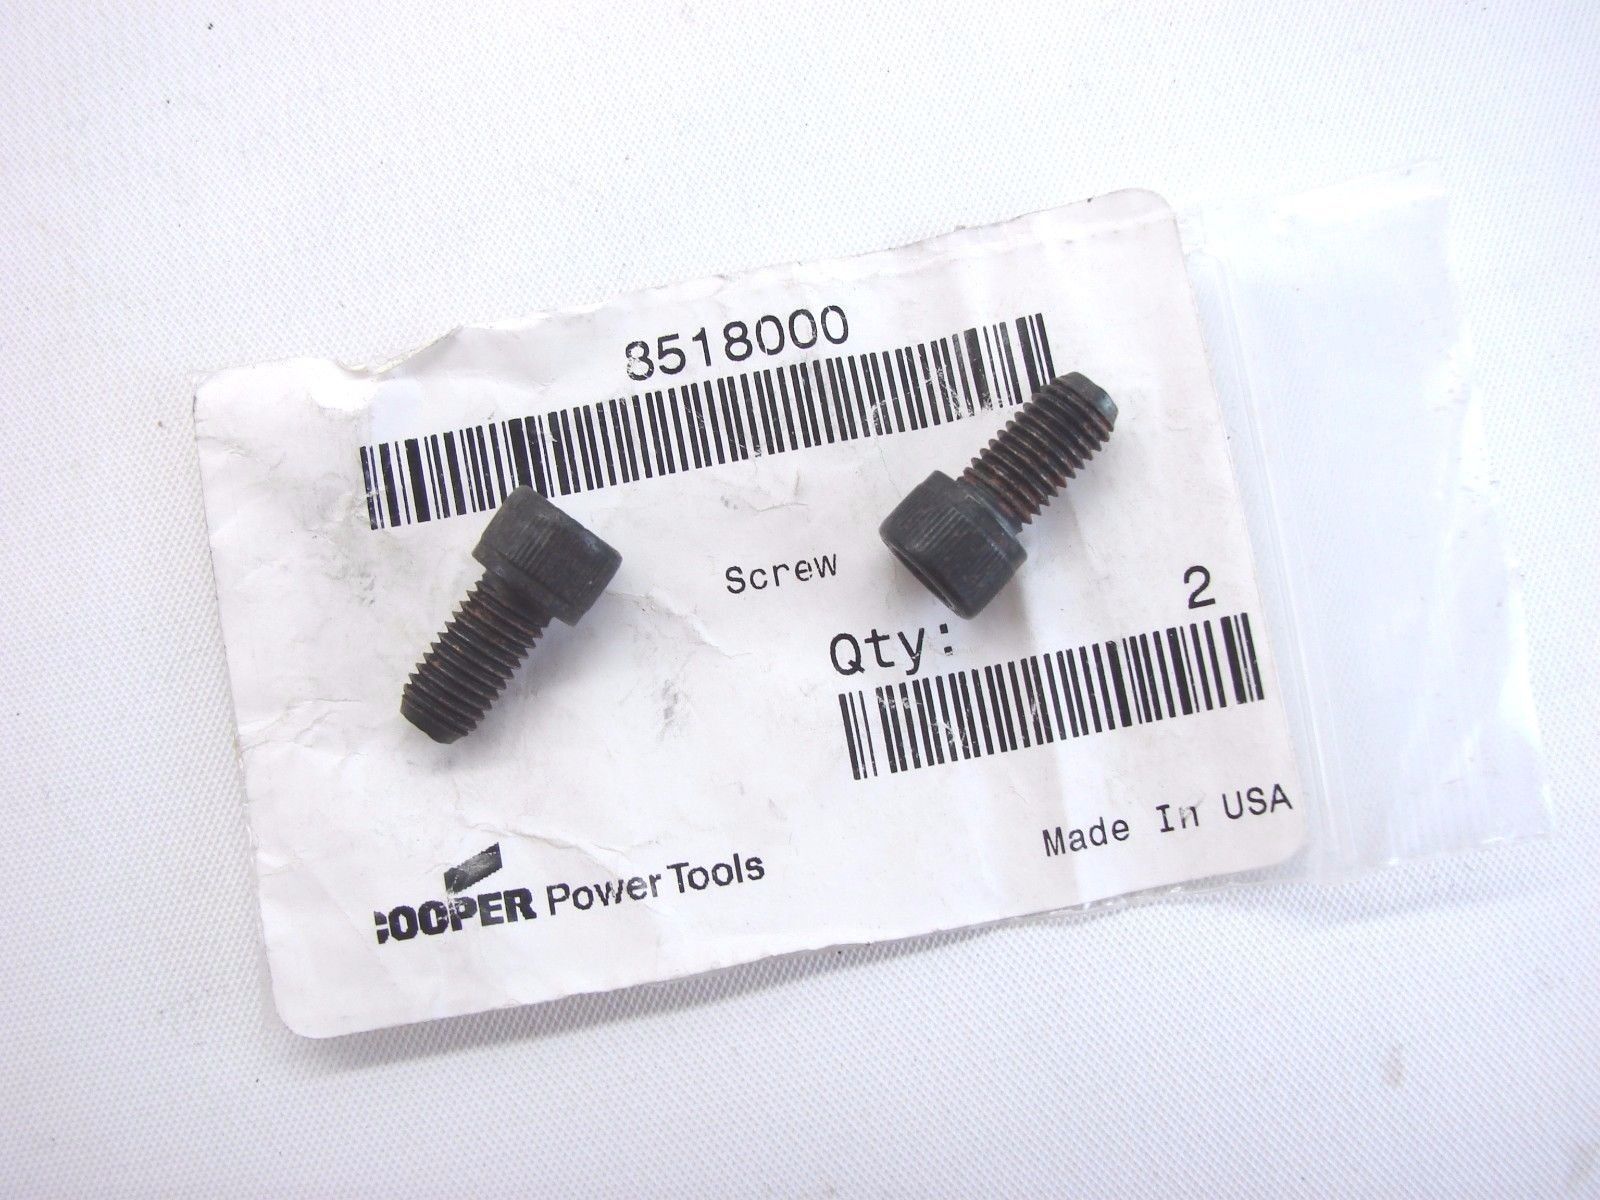 Cooper Power Tools 8518000 Screw Replacement Parts Package Of b287 2